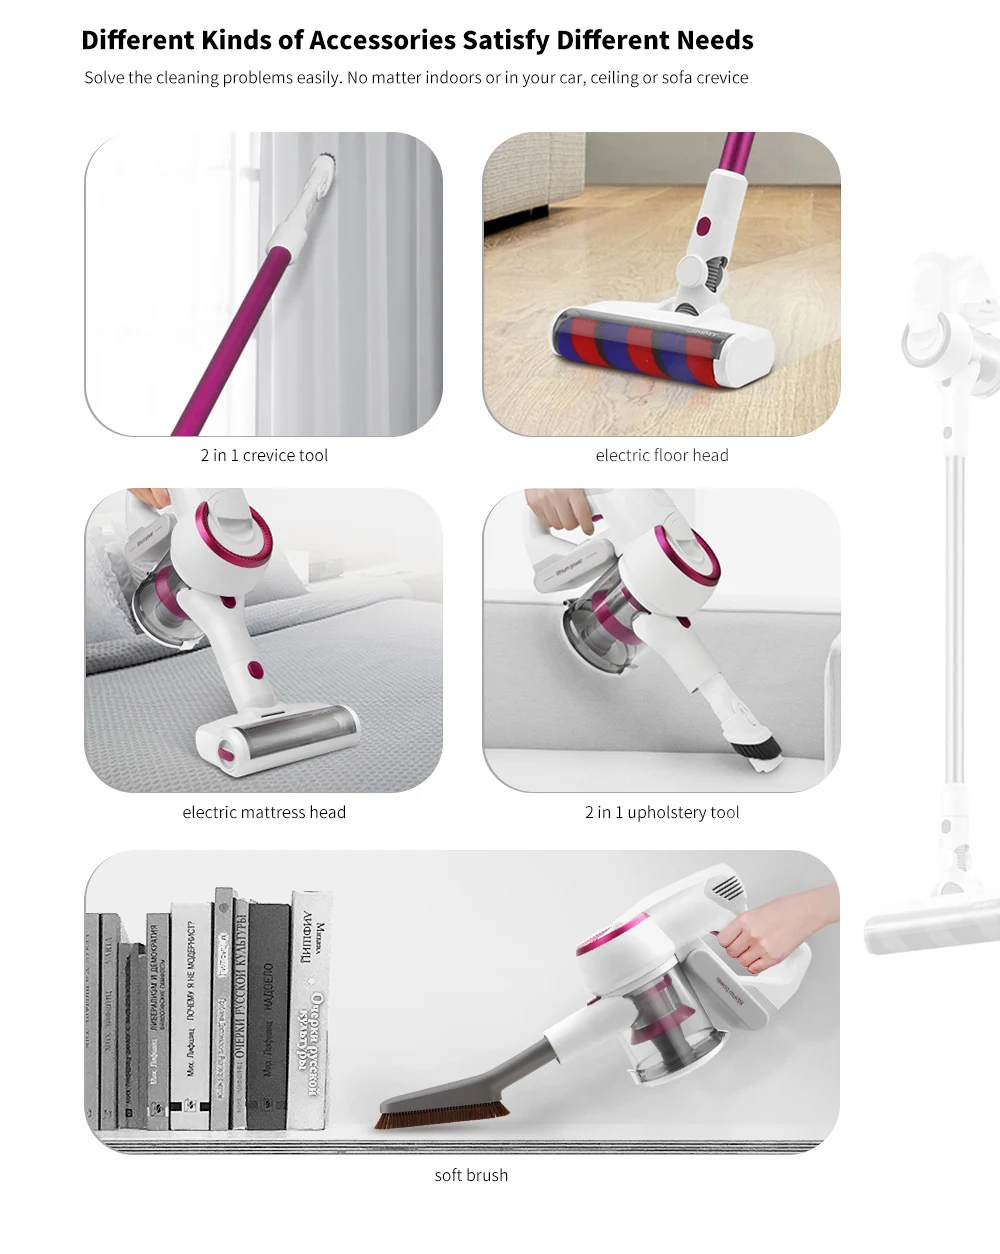 01 JIMMY JV53 Handheld Cordless Vacuum Cleaner 20KPa Effective Suction Power Carpet Sweep Clean Home Wireless Dust Collector